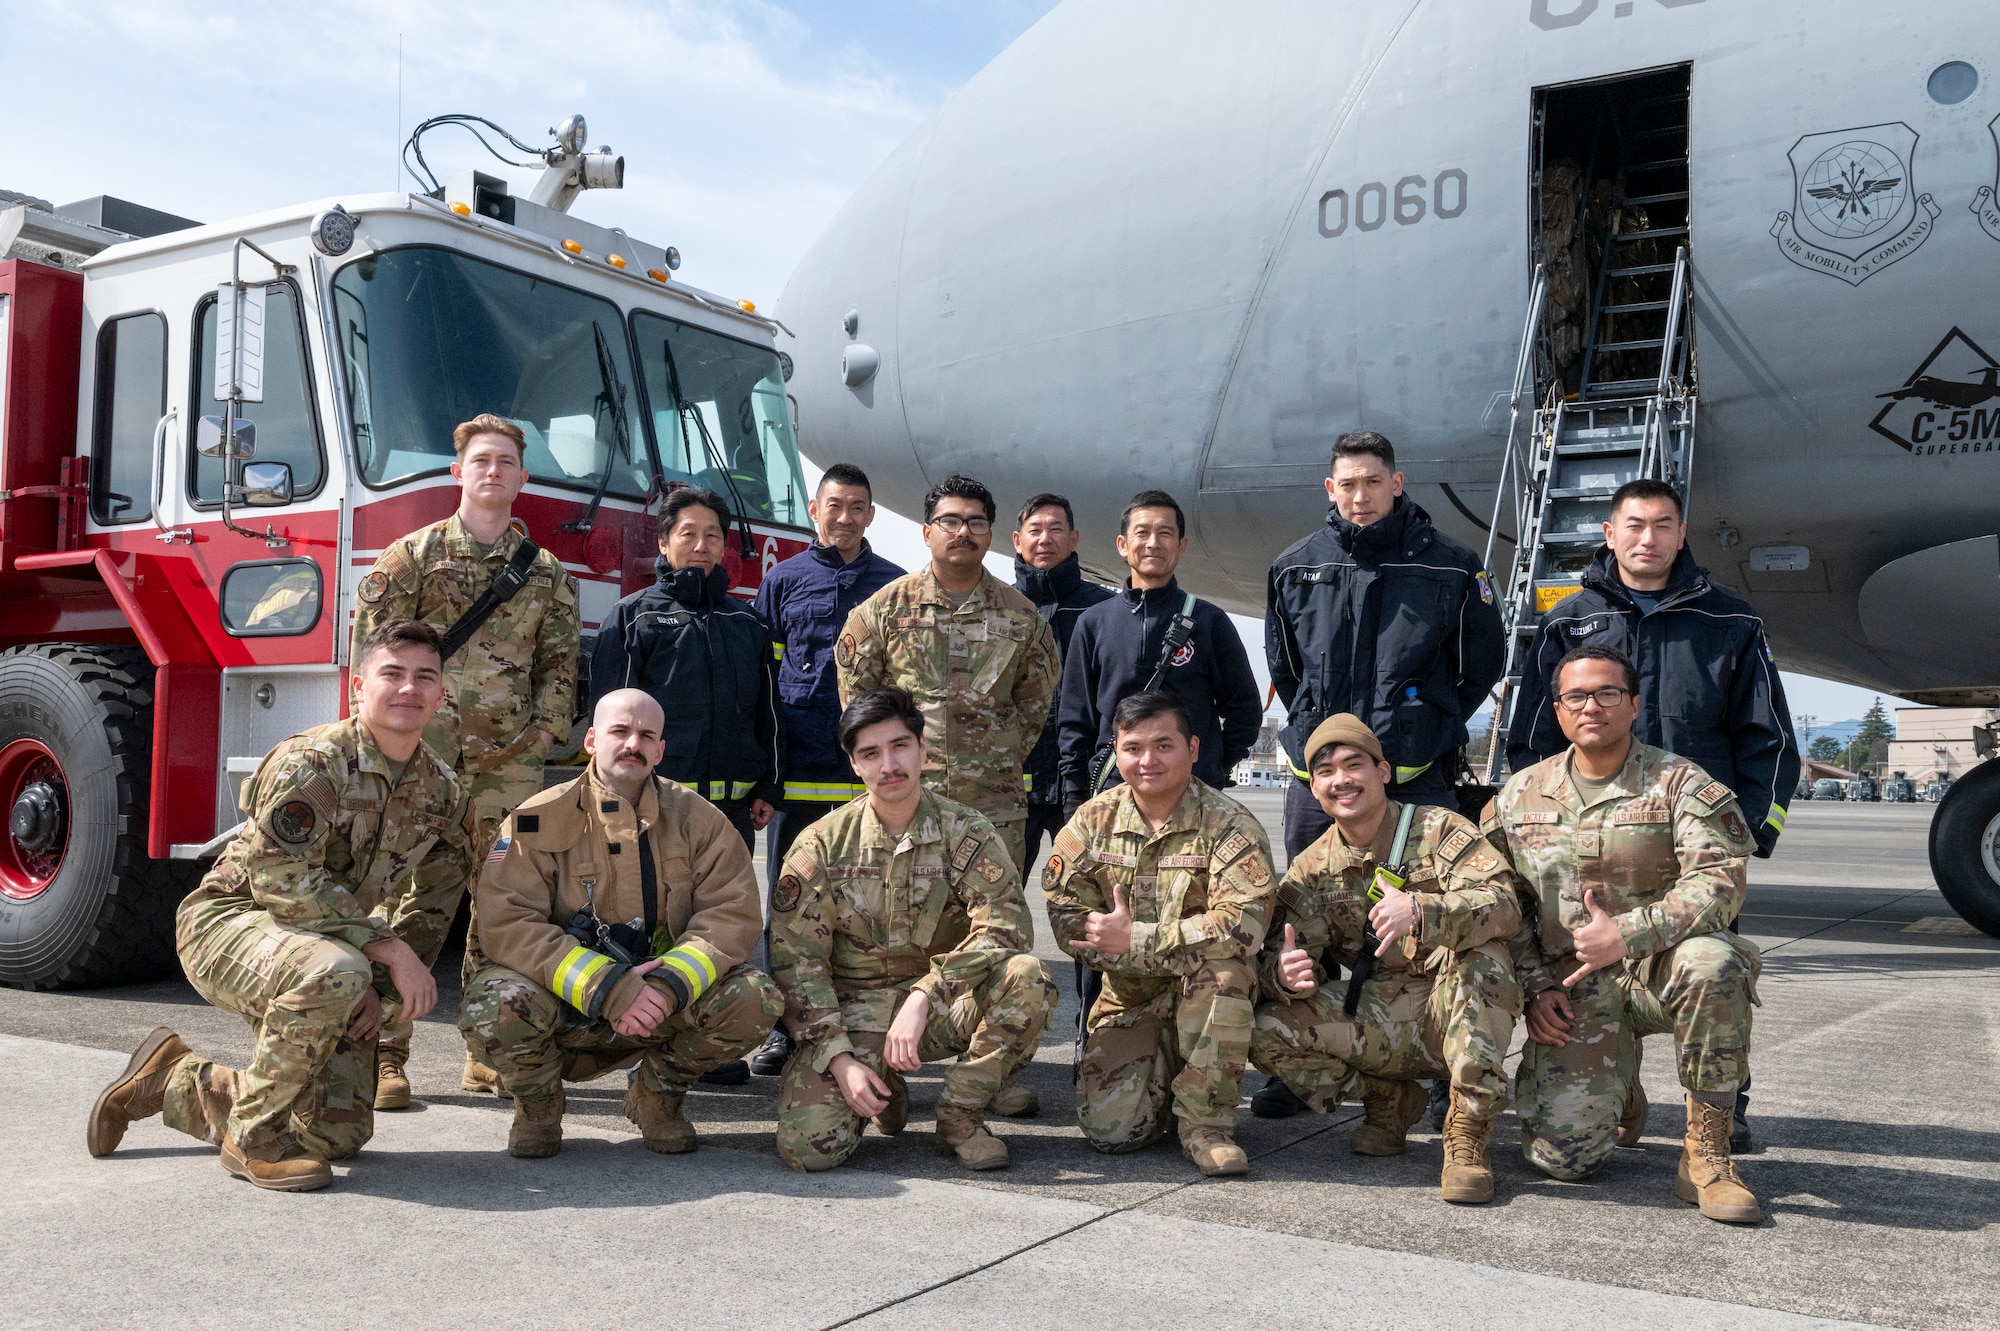 Firefighters from the 374th Civil Engineer Squadron pose for a group photo.